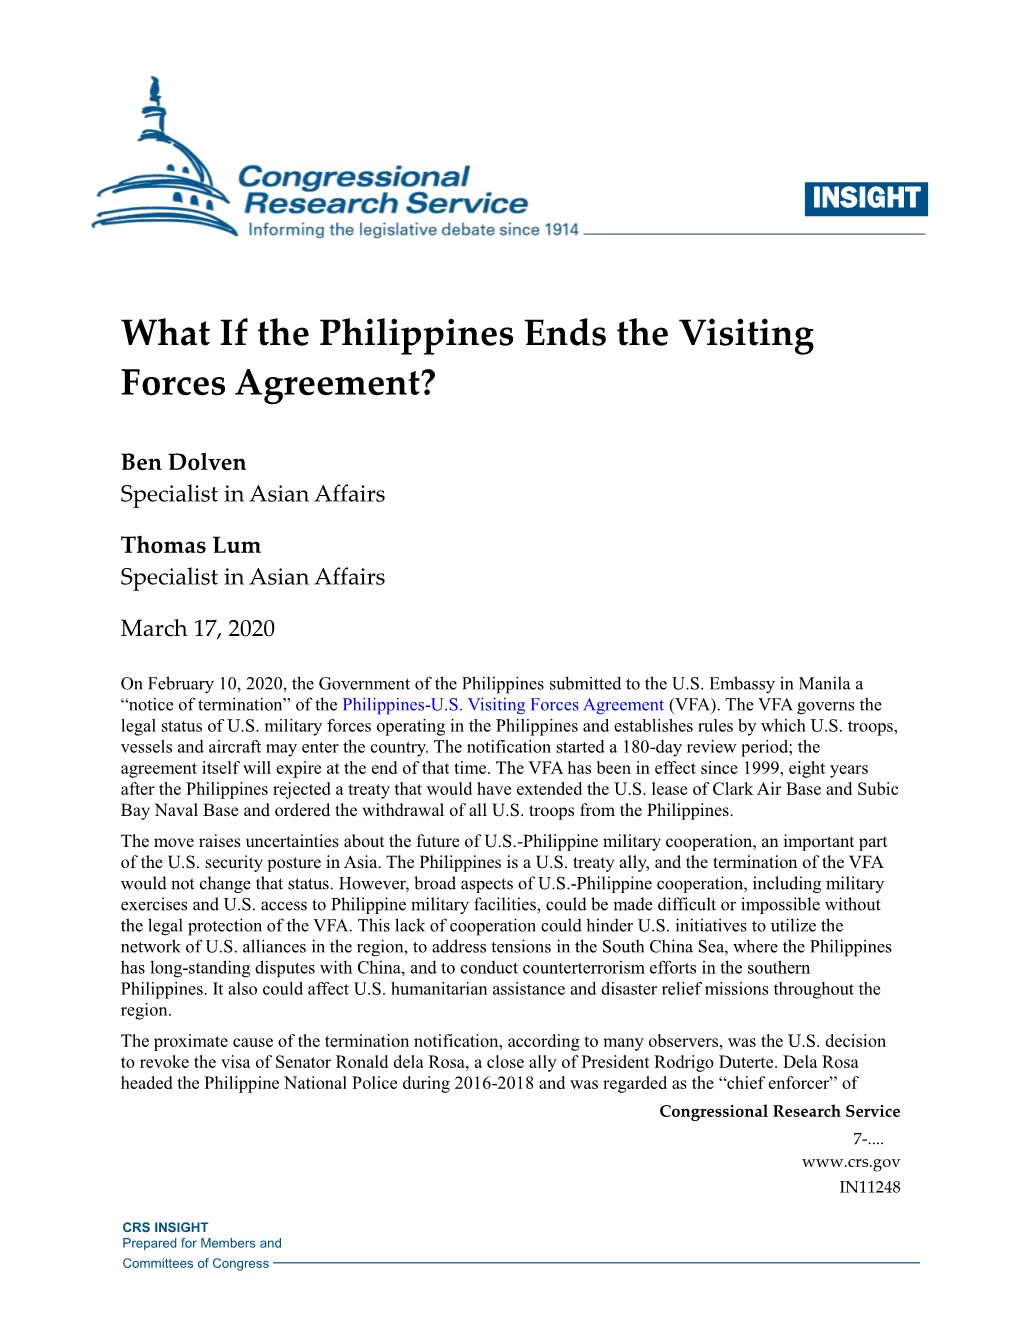 What If the Philippines Ends the Visiting Forces Agreement?